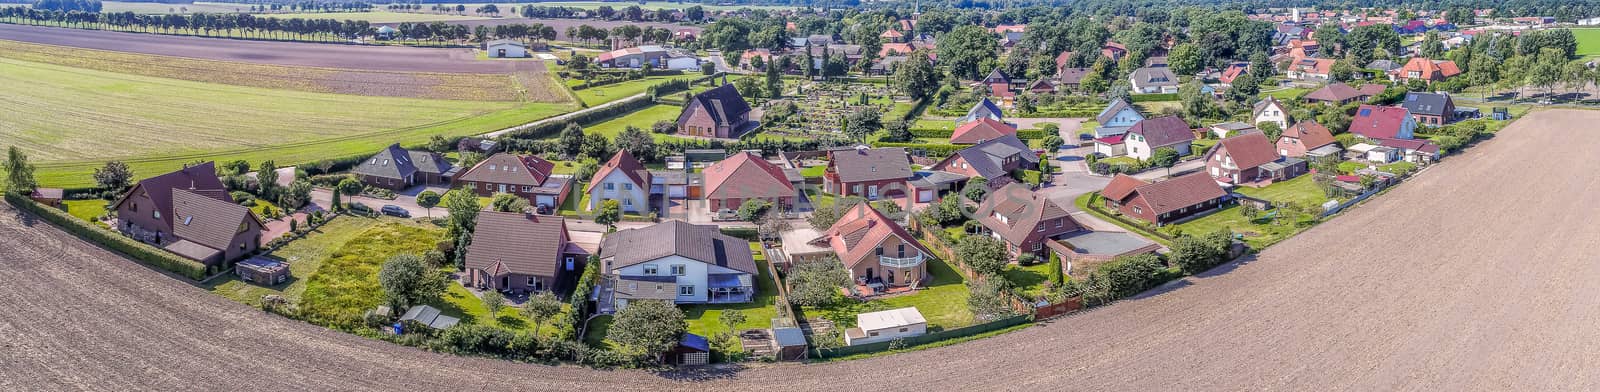 Stiched panorama of a small village near Gifhorn, Germany by geogif